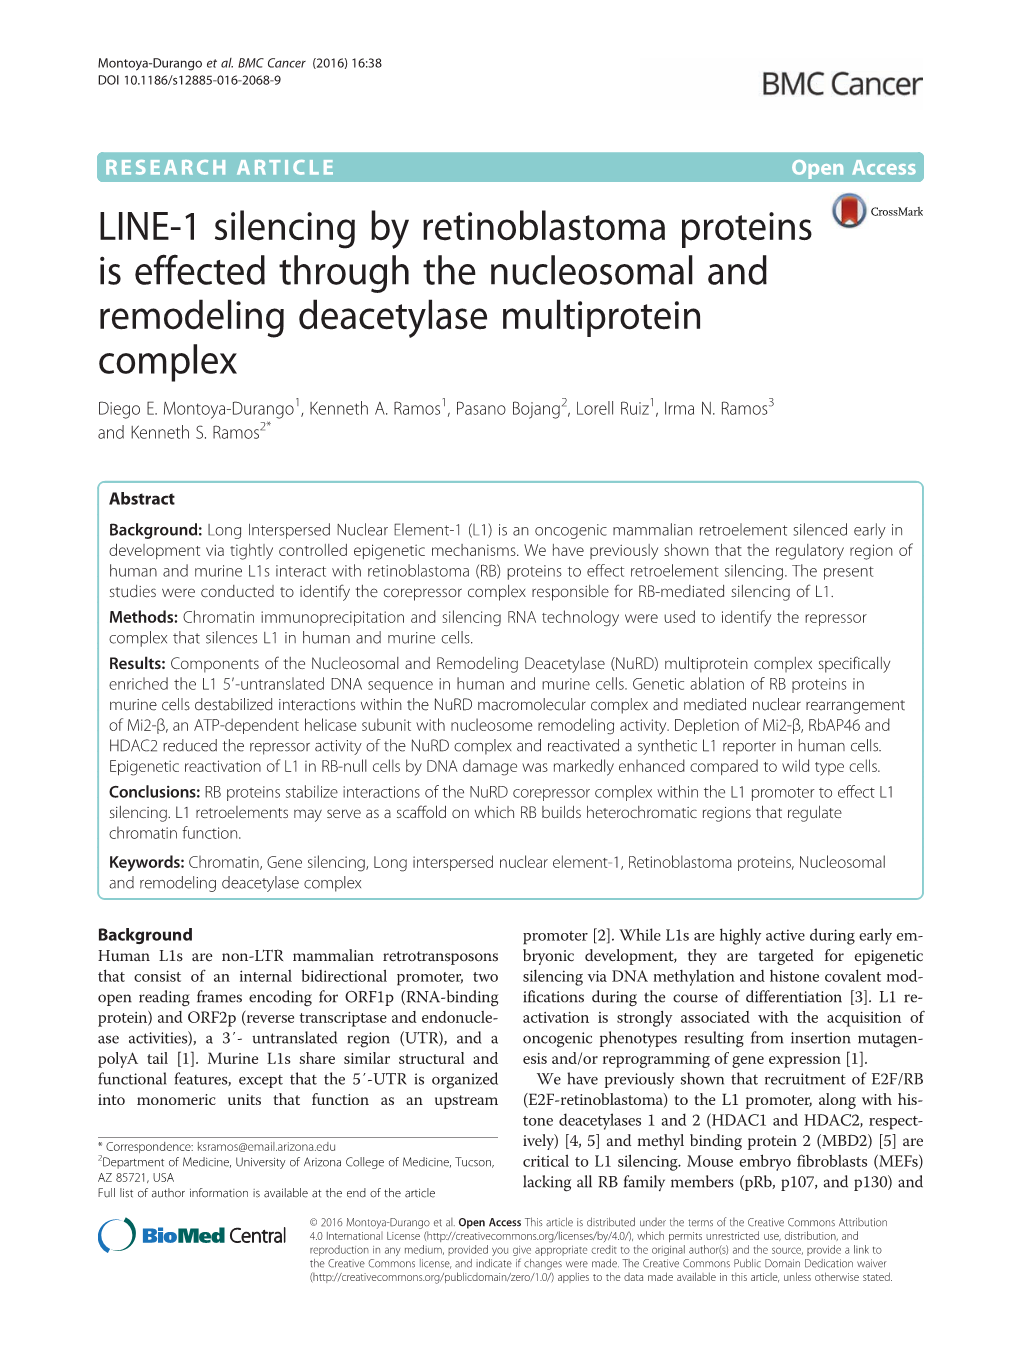 LINE-1 Silencing by Retinoblastoma Proteins Is Effected Through the Nucleosomal and Remodeling Deacetylase Multiprotein Complex Diego E